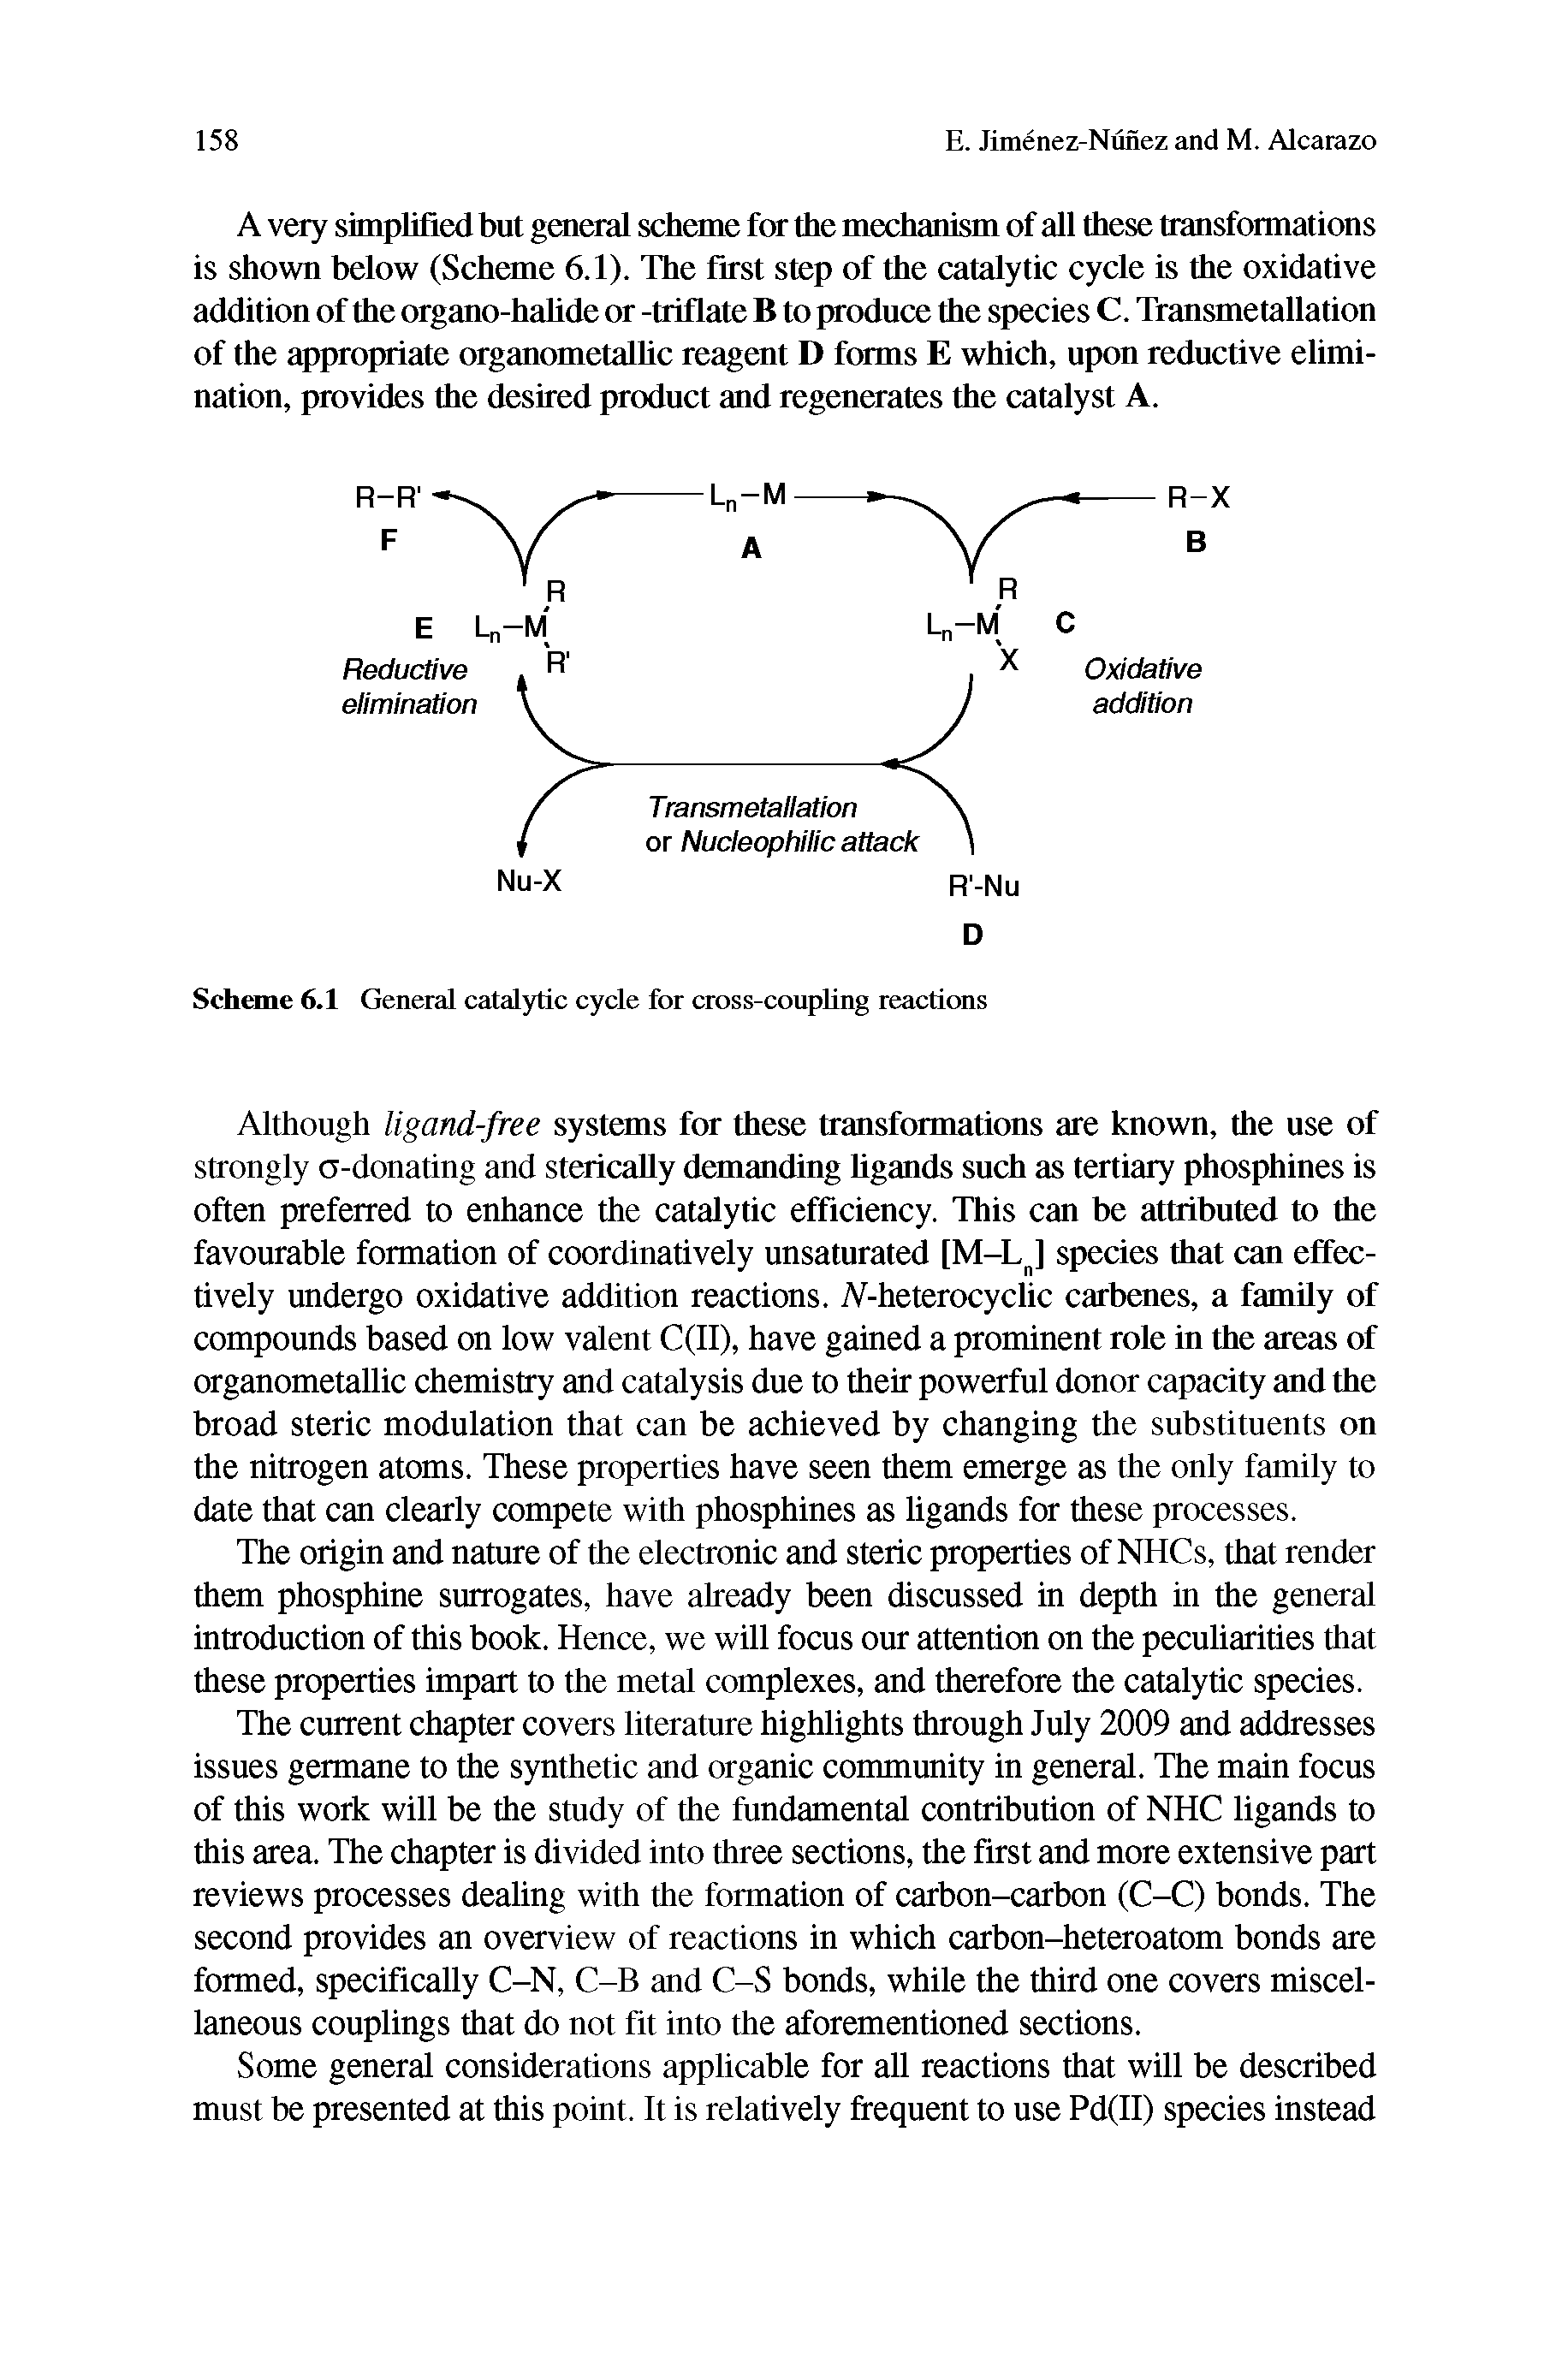 Scheme 6.1 General catalytic cycle for cross-coupUng reactions...